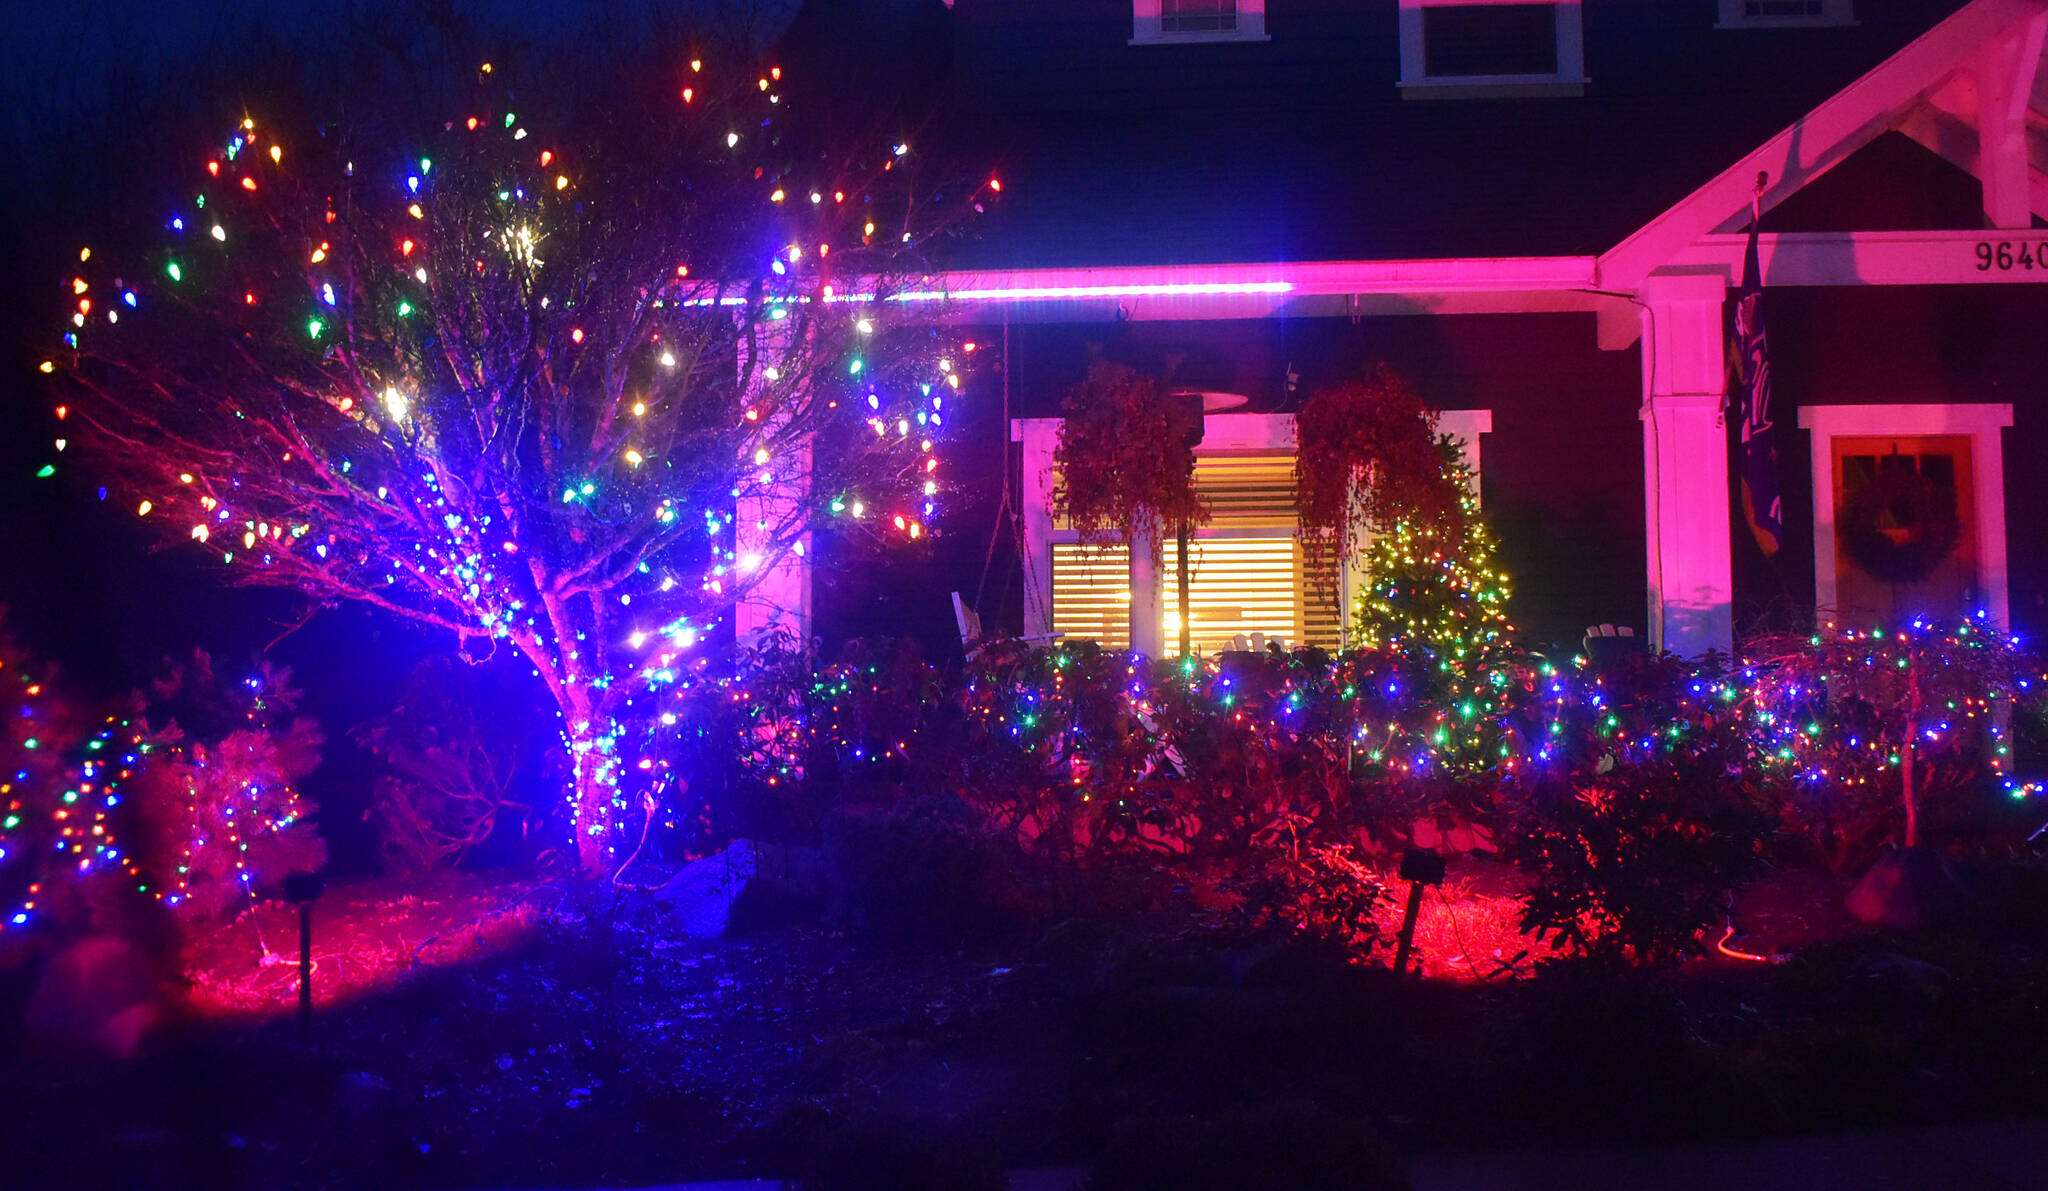 The North Town Woods houses have a variety of holiday light displays.